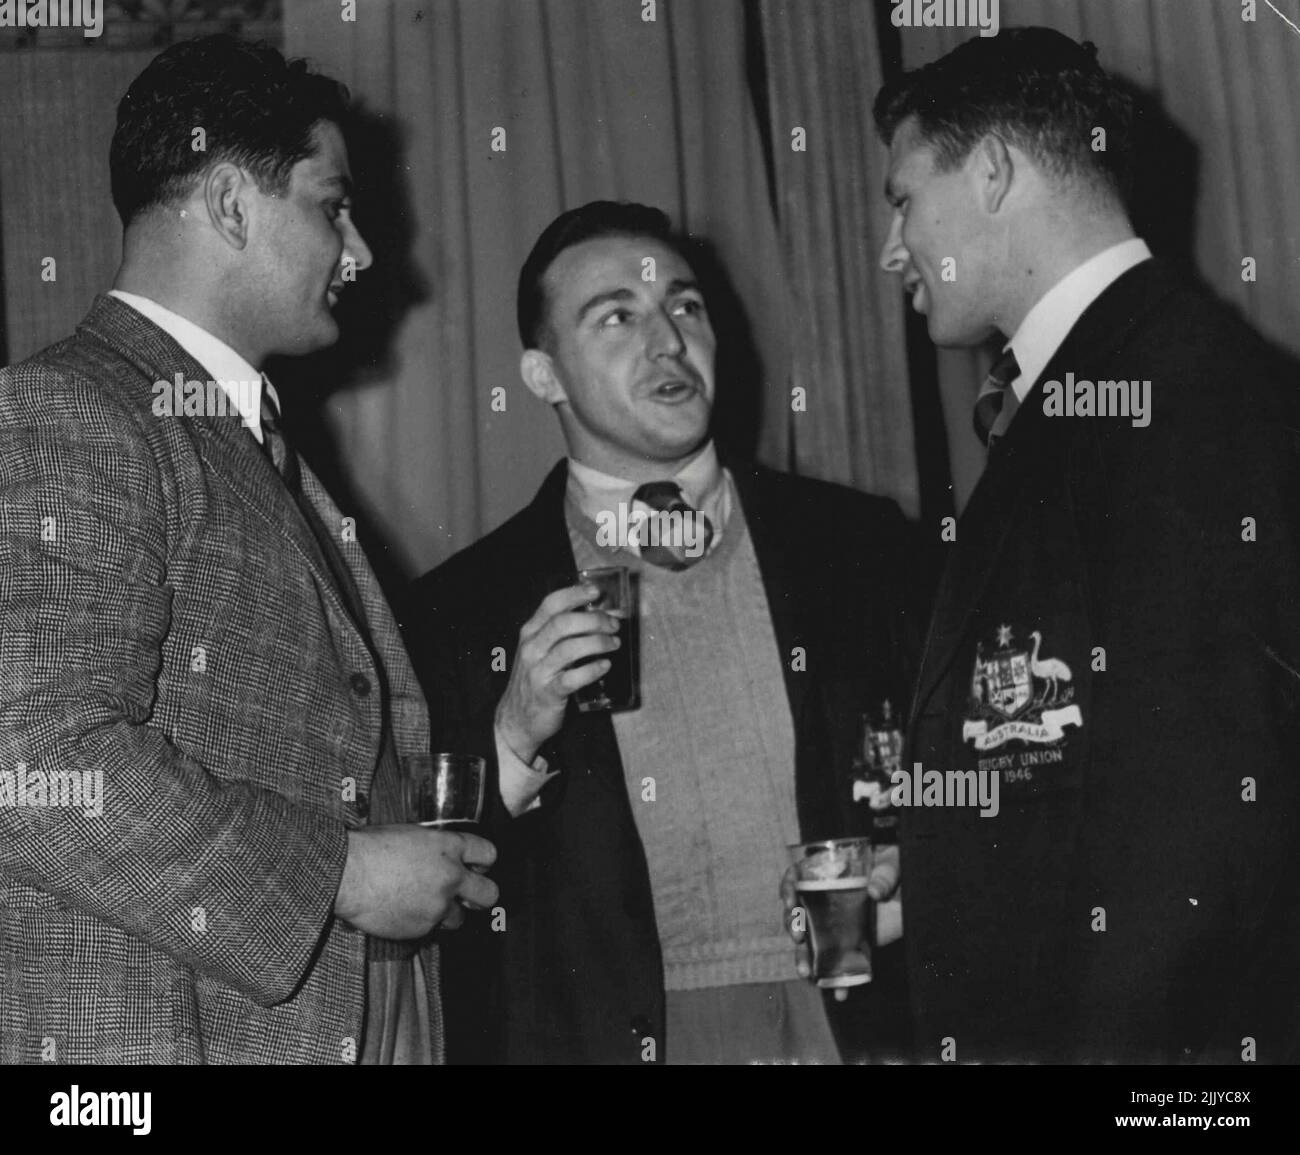 Over Drinks, Don Eurness (centre), who unluckily missed selection for England, whishes luck to Randwick Clubmates, Nick Shehadie (left) and Arthur Buchan. July 19, 1947. Stock Photo